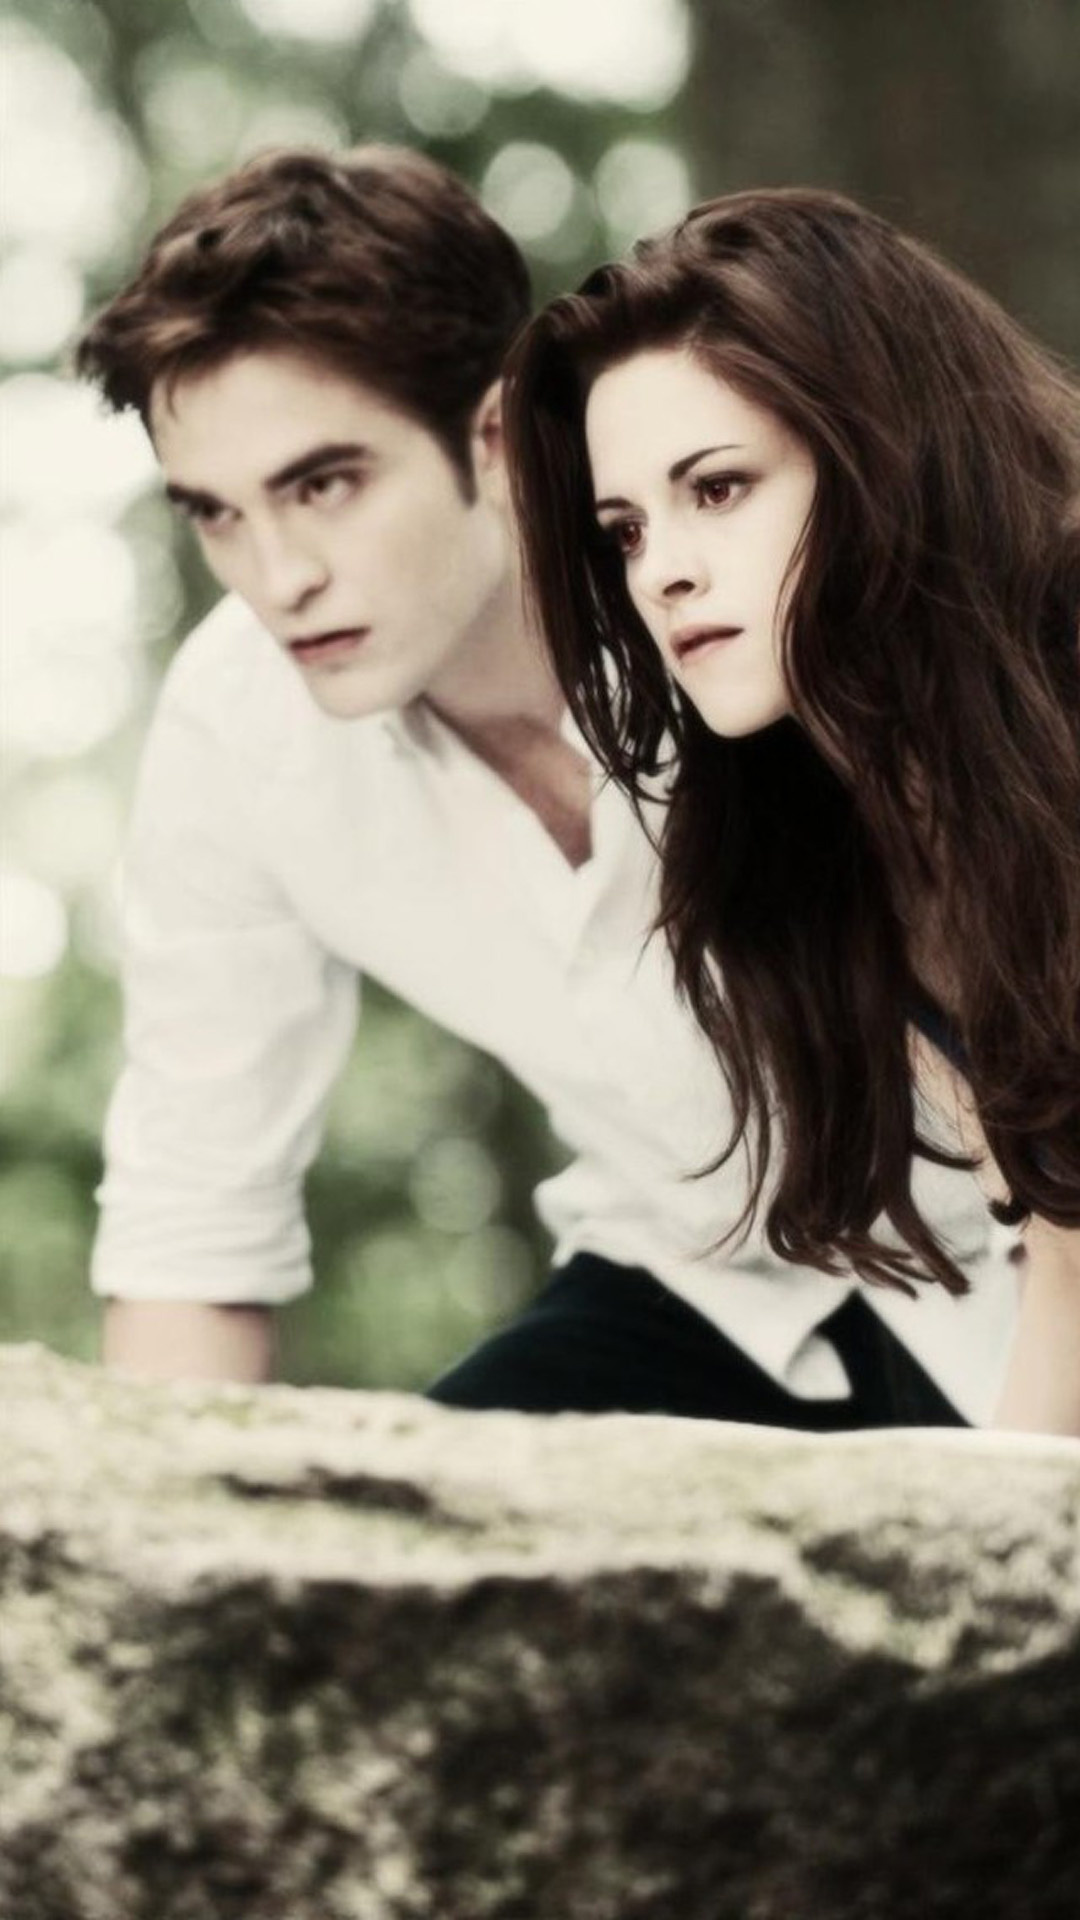 Twilight saga, Pictures wallpapers, Series poster, Vampire love story, 1080x1920 Full HD Phone